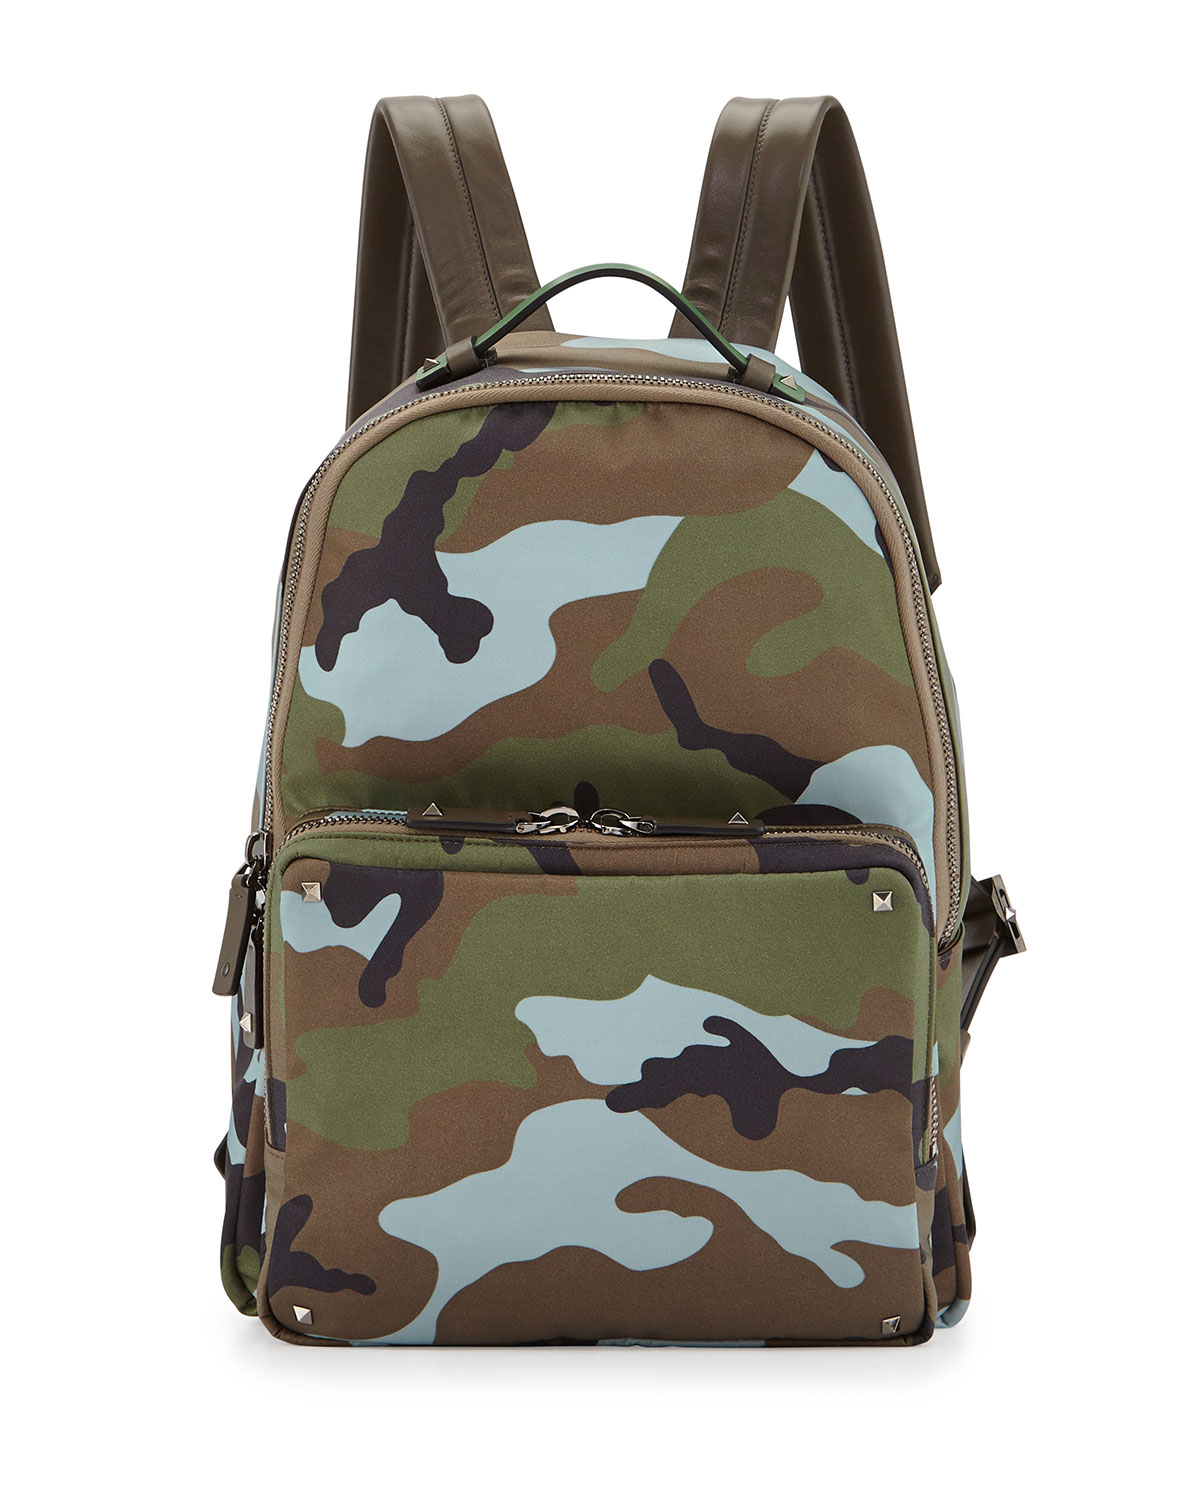 Camo Backpacks For Men | The Art of Mike Mignola